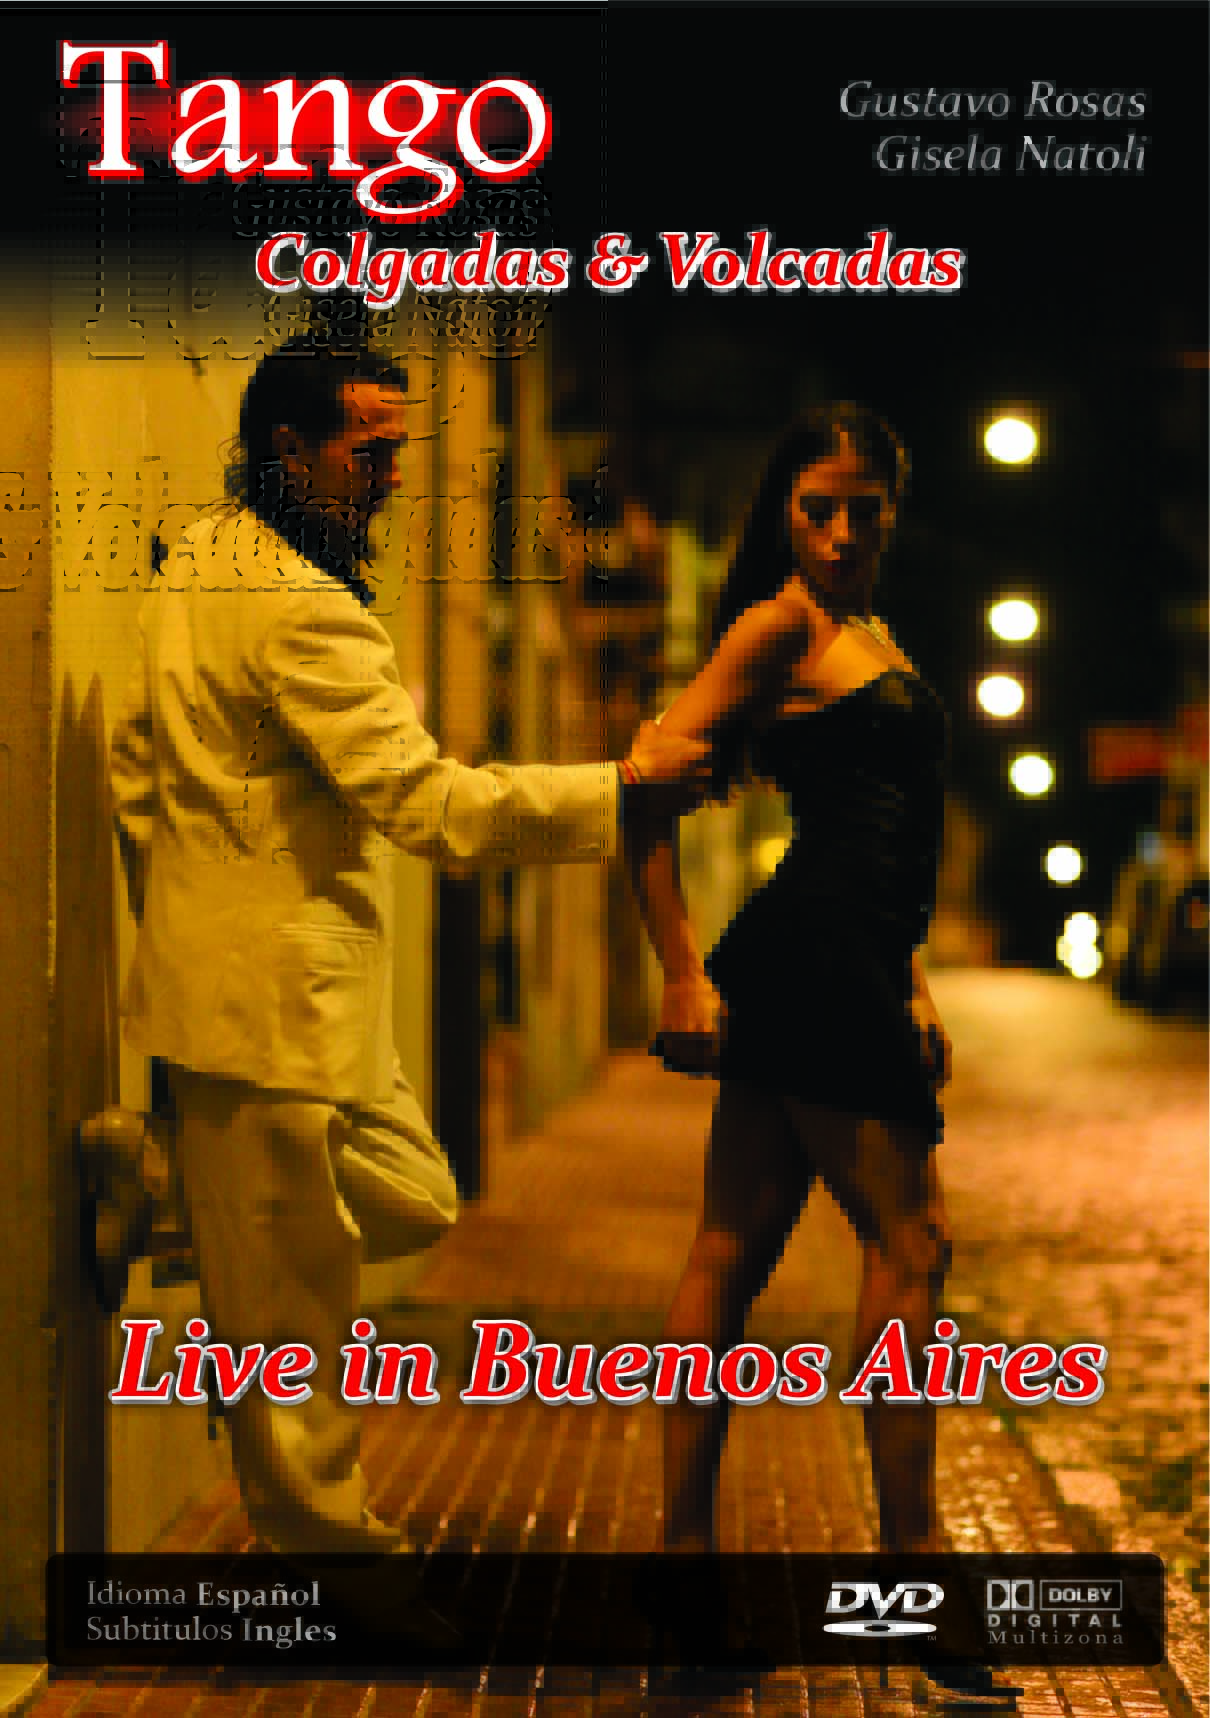 Tango: Live in Buenos Aires